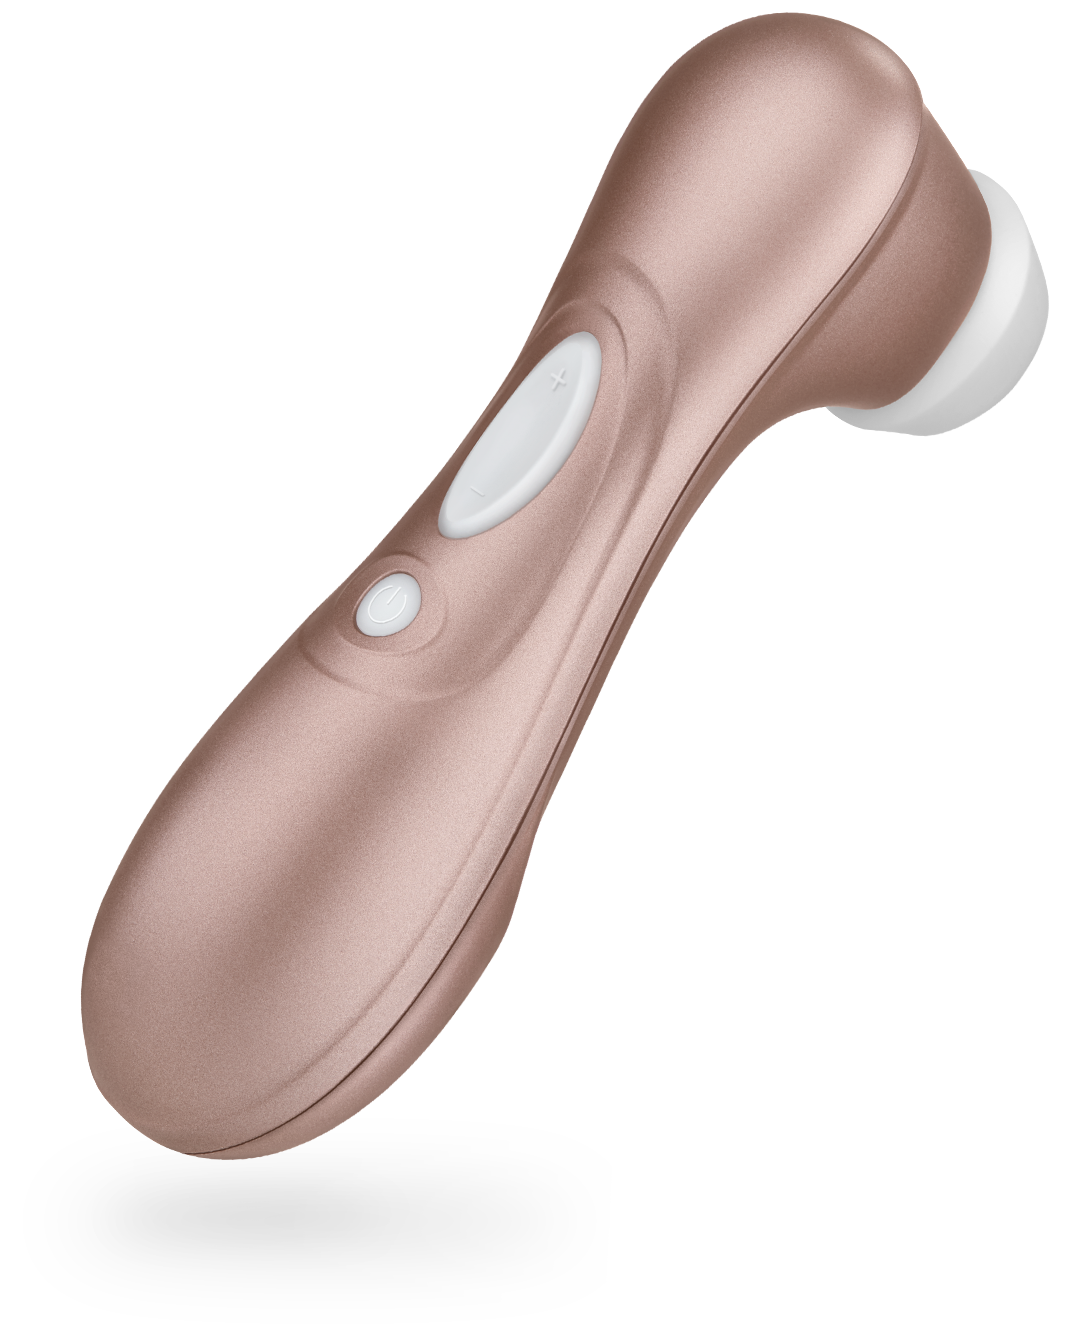 The Satisfyer Pro 2, for a product review